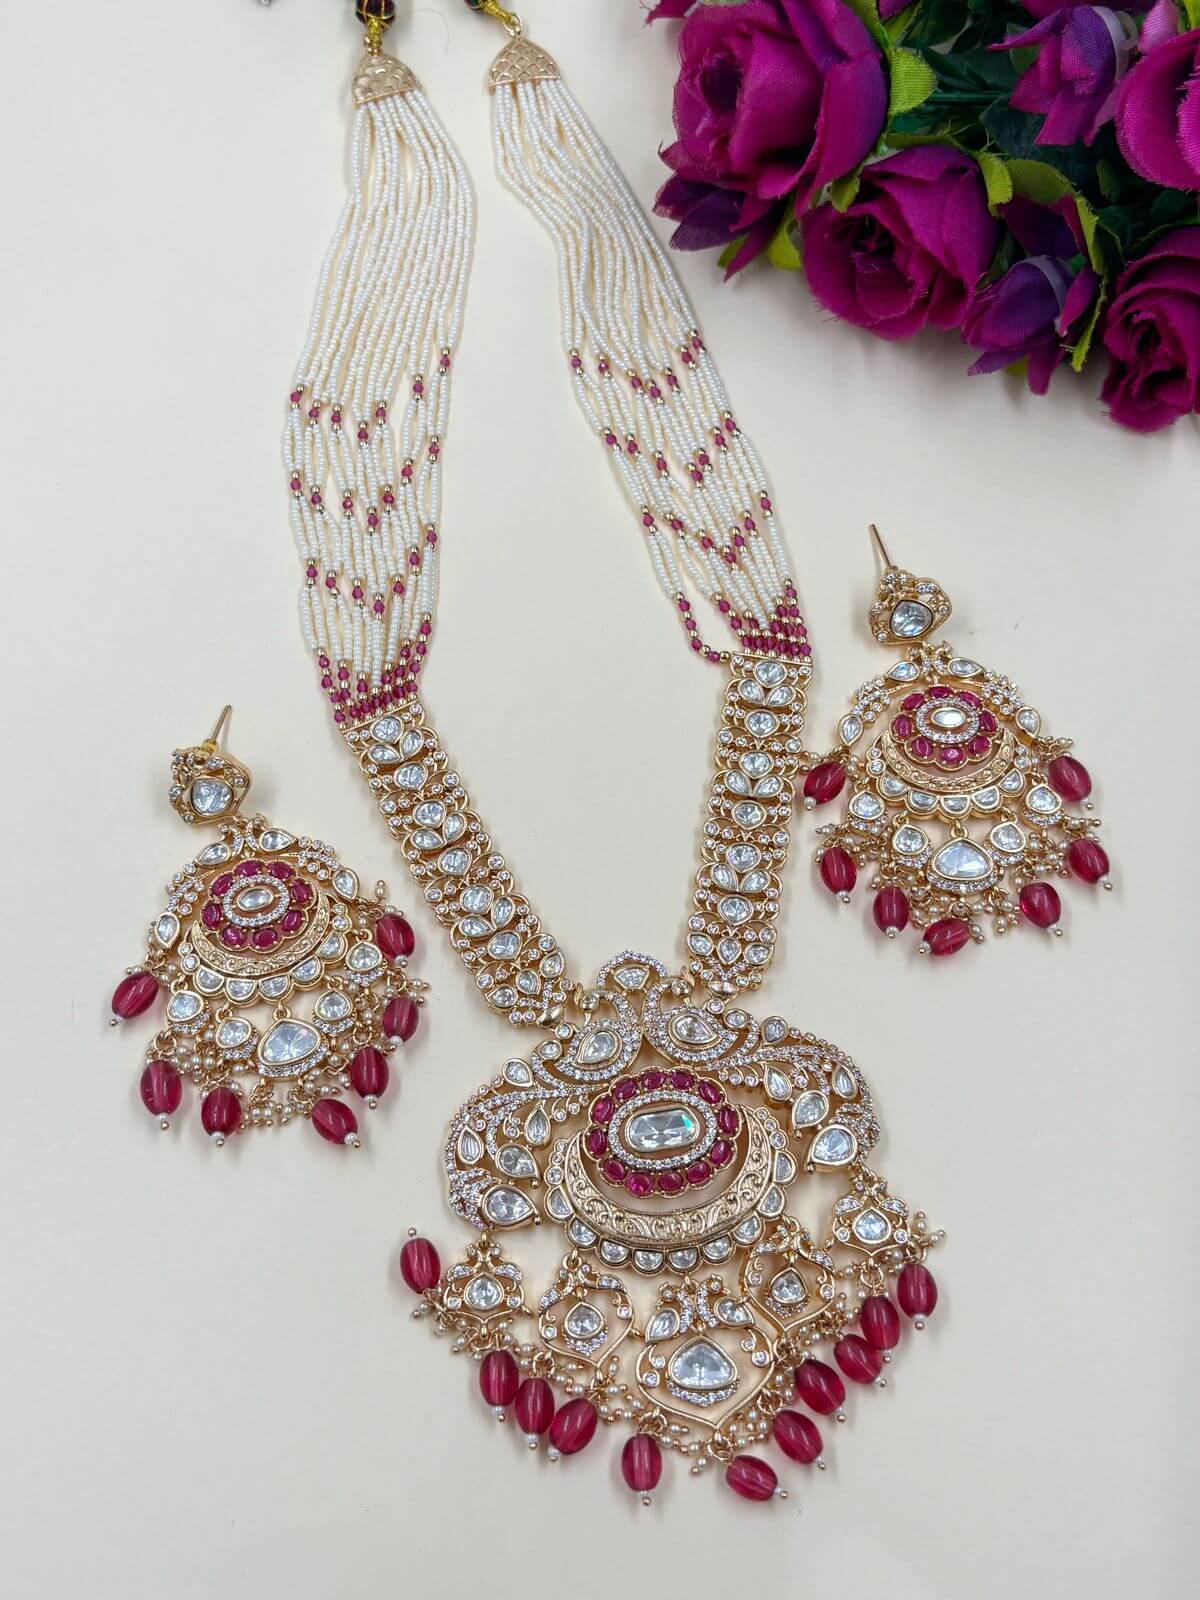  Exclusive Long Polki Studded Peacock Design Necklace Set For Weddings